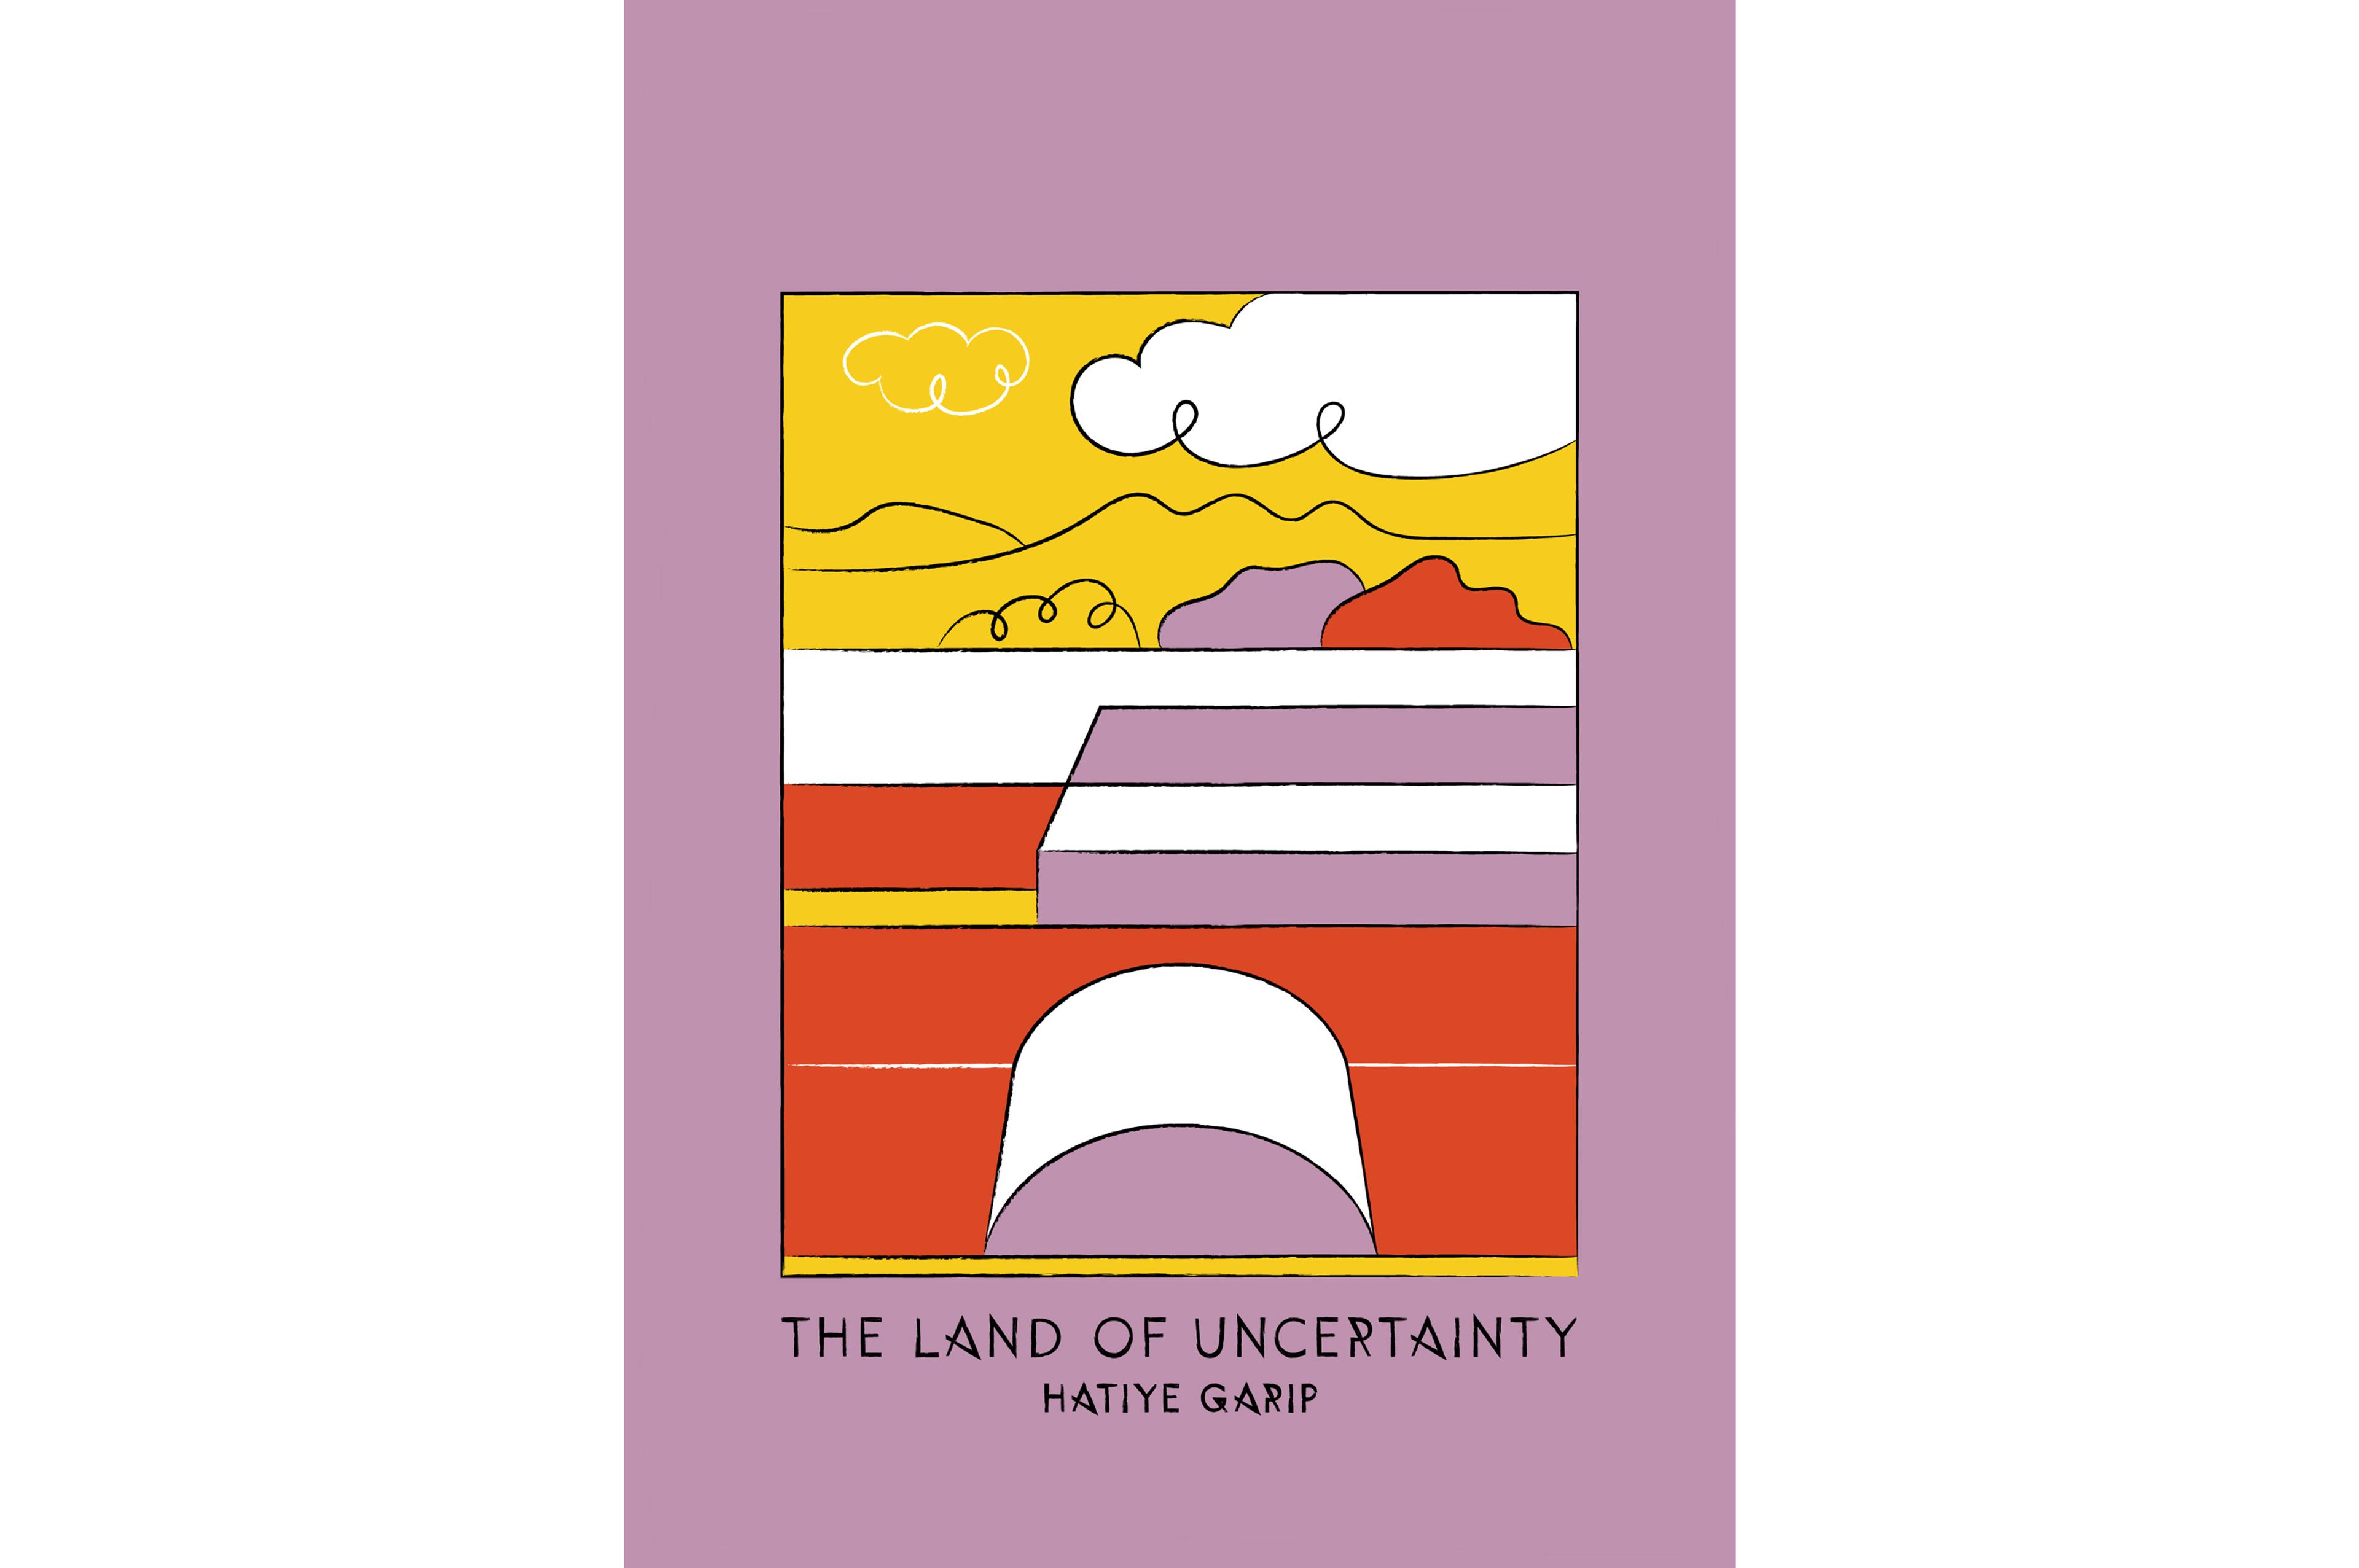 Front cover of the book with an abstract illustration of a landscape and the text, 'The Land of Uncertainty' and 'Hatiye Garip'.